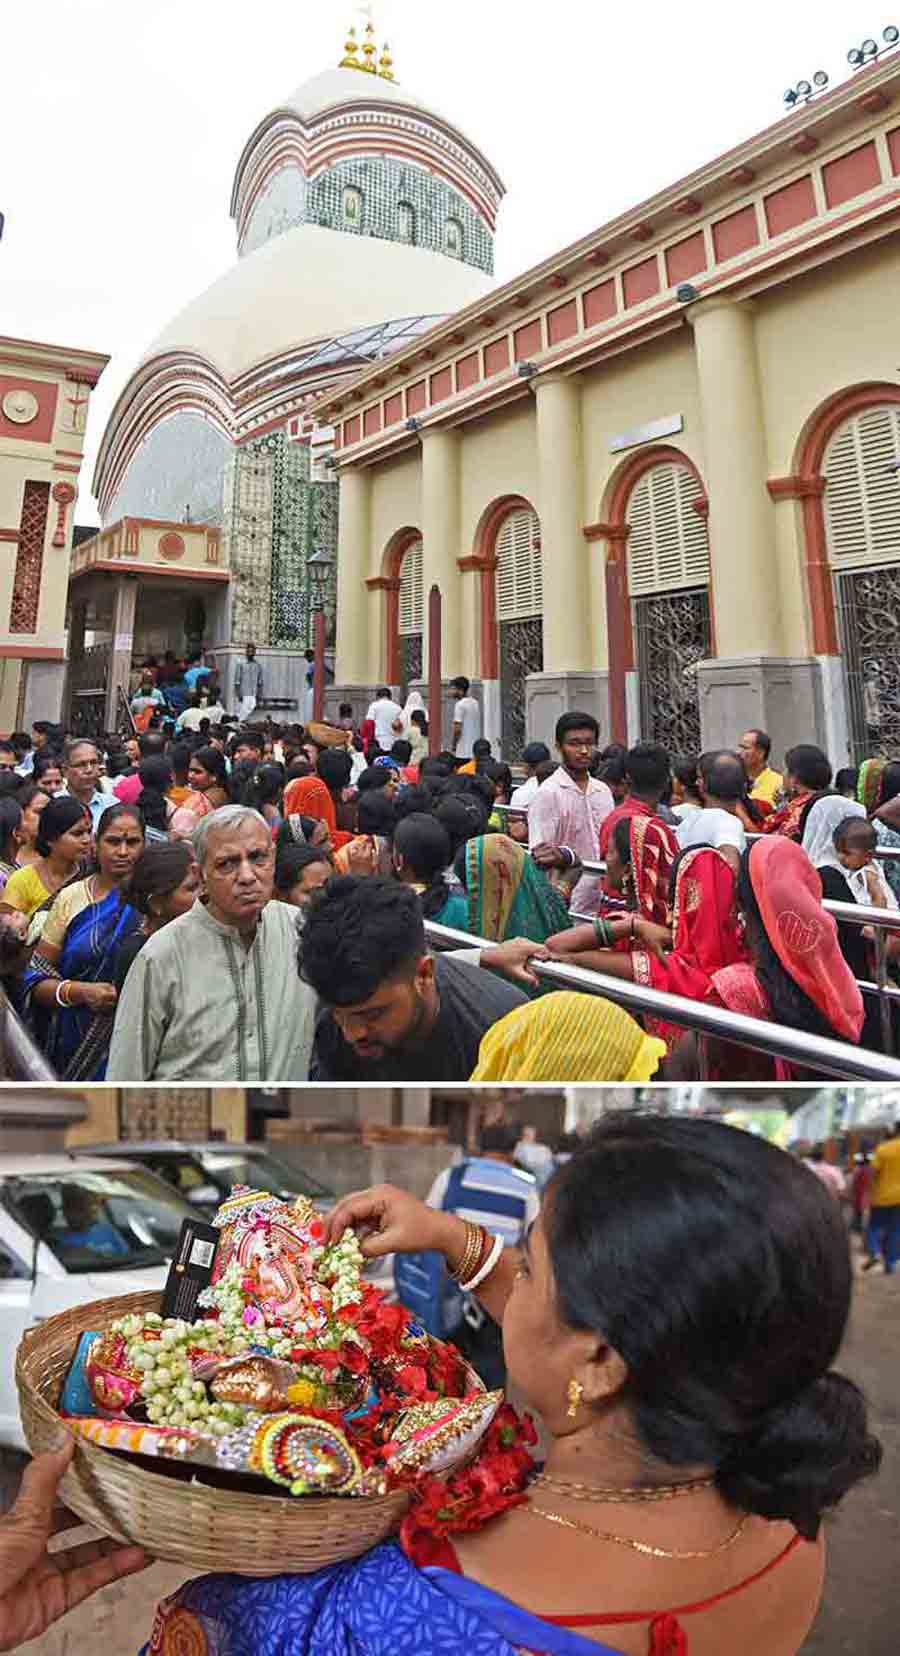 People queue up at Kalighat temple to offer puja and (above) a woman balances an idol of Lord Ganesh and several garlands after performing puja at the temple